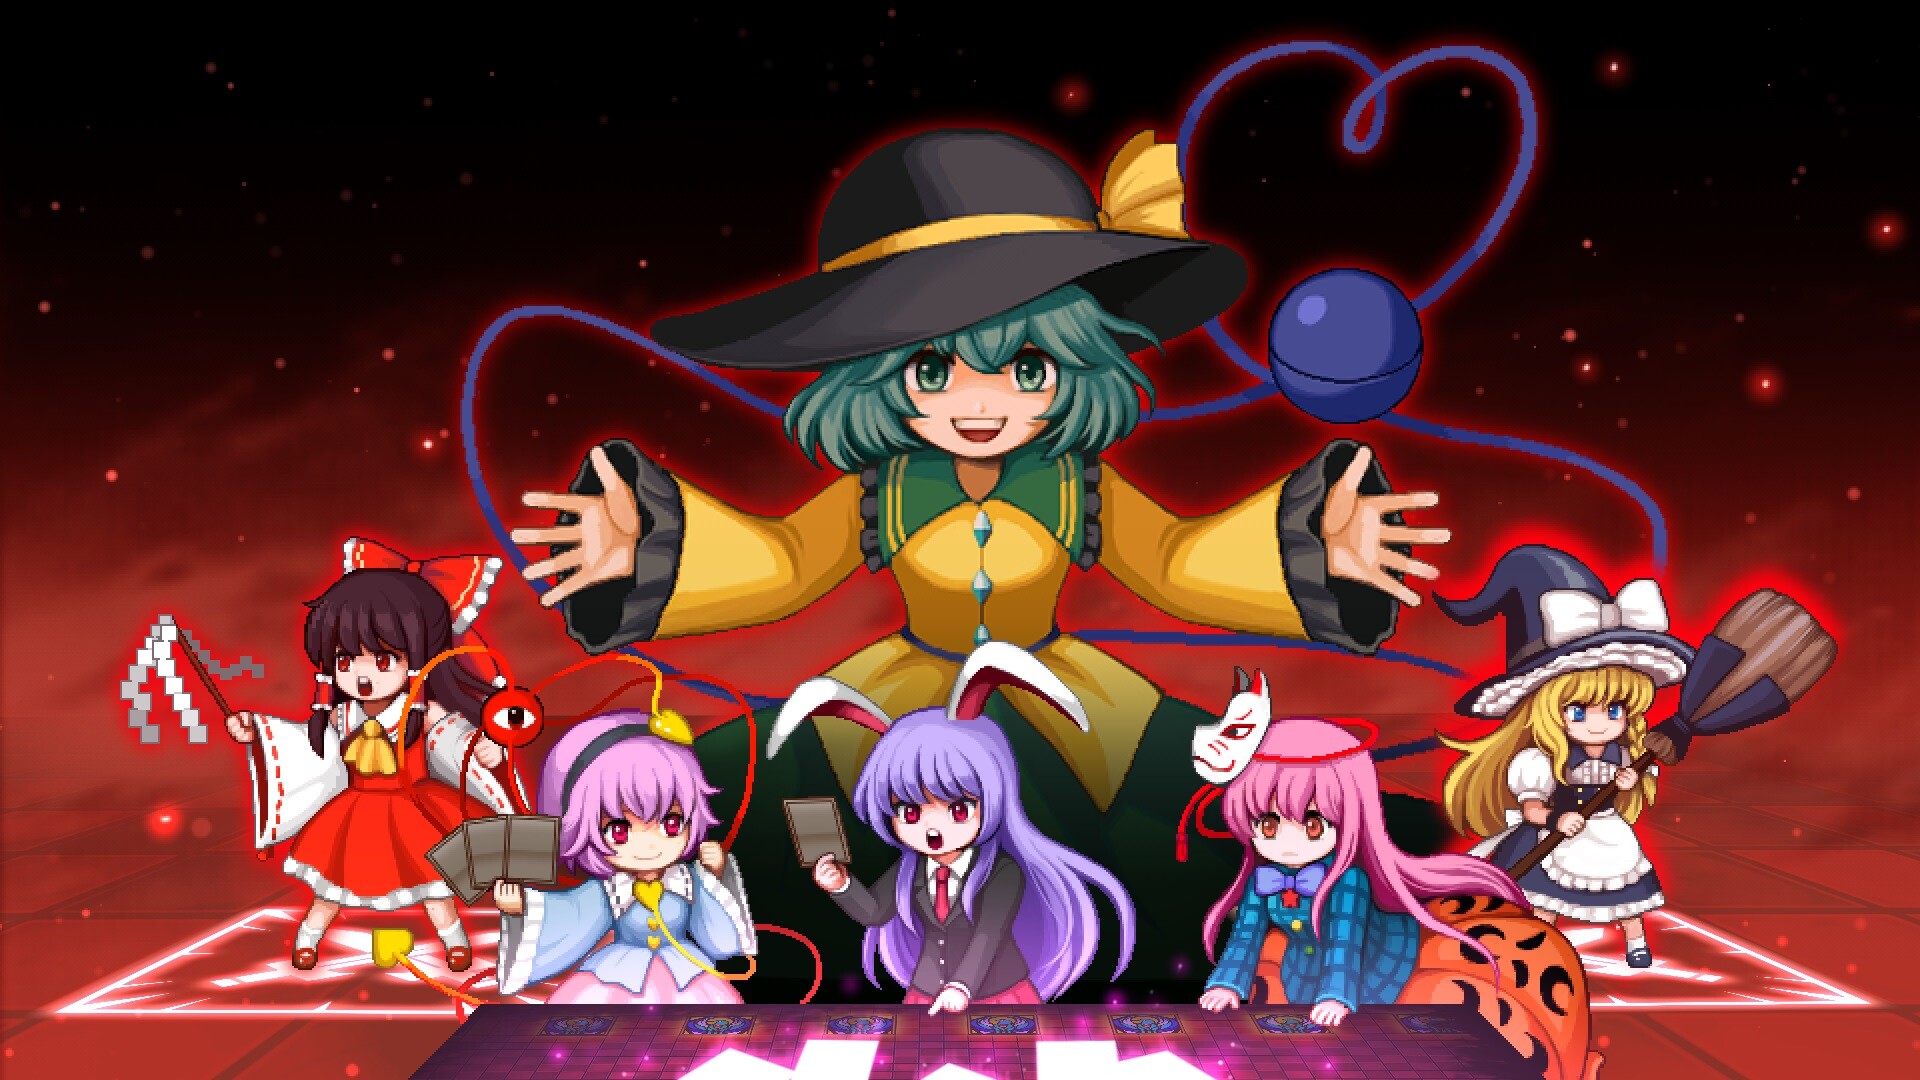 Touhou Dungeon Maker: The Labyrinth of Heart